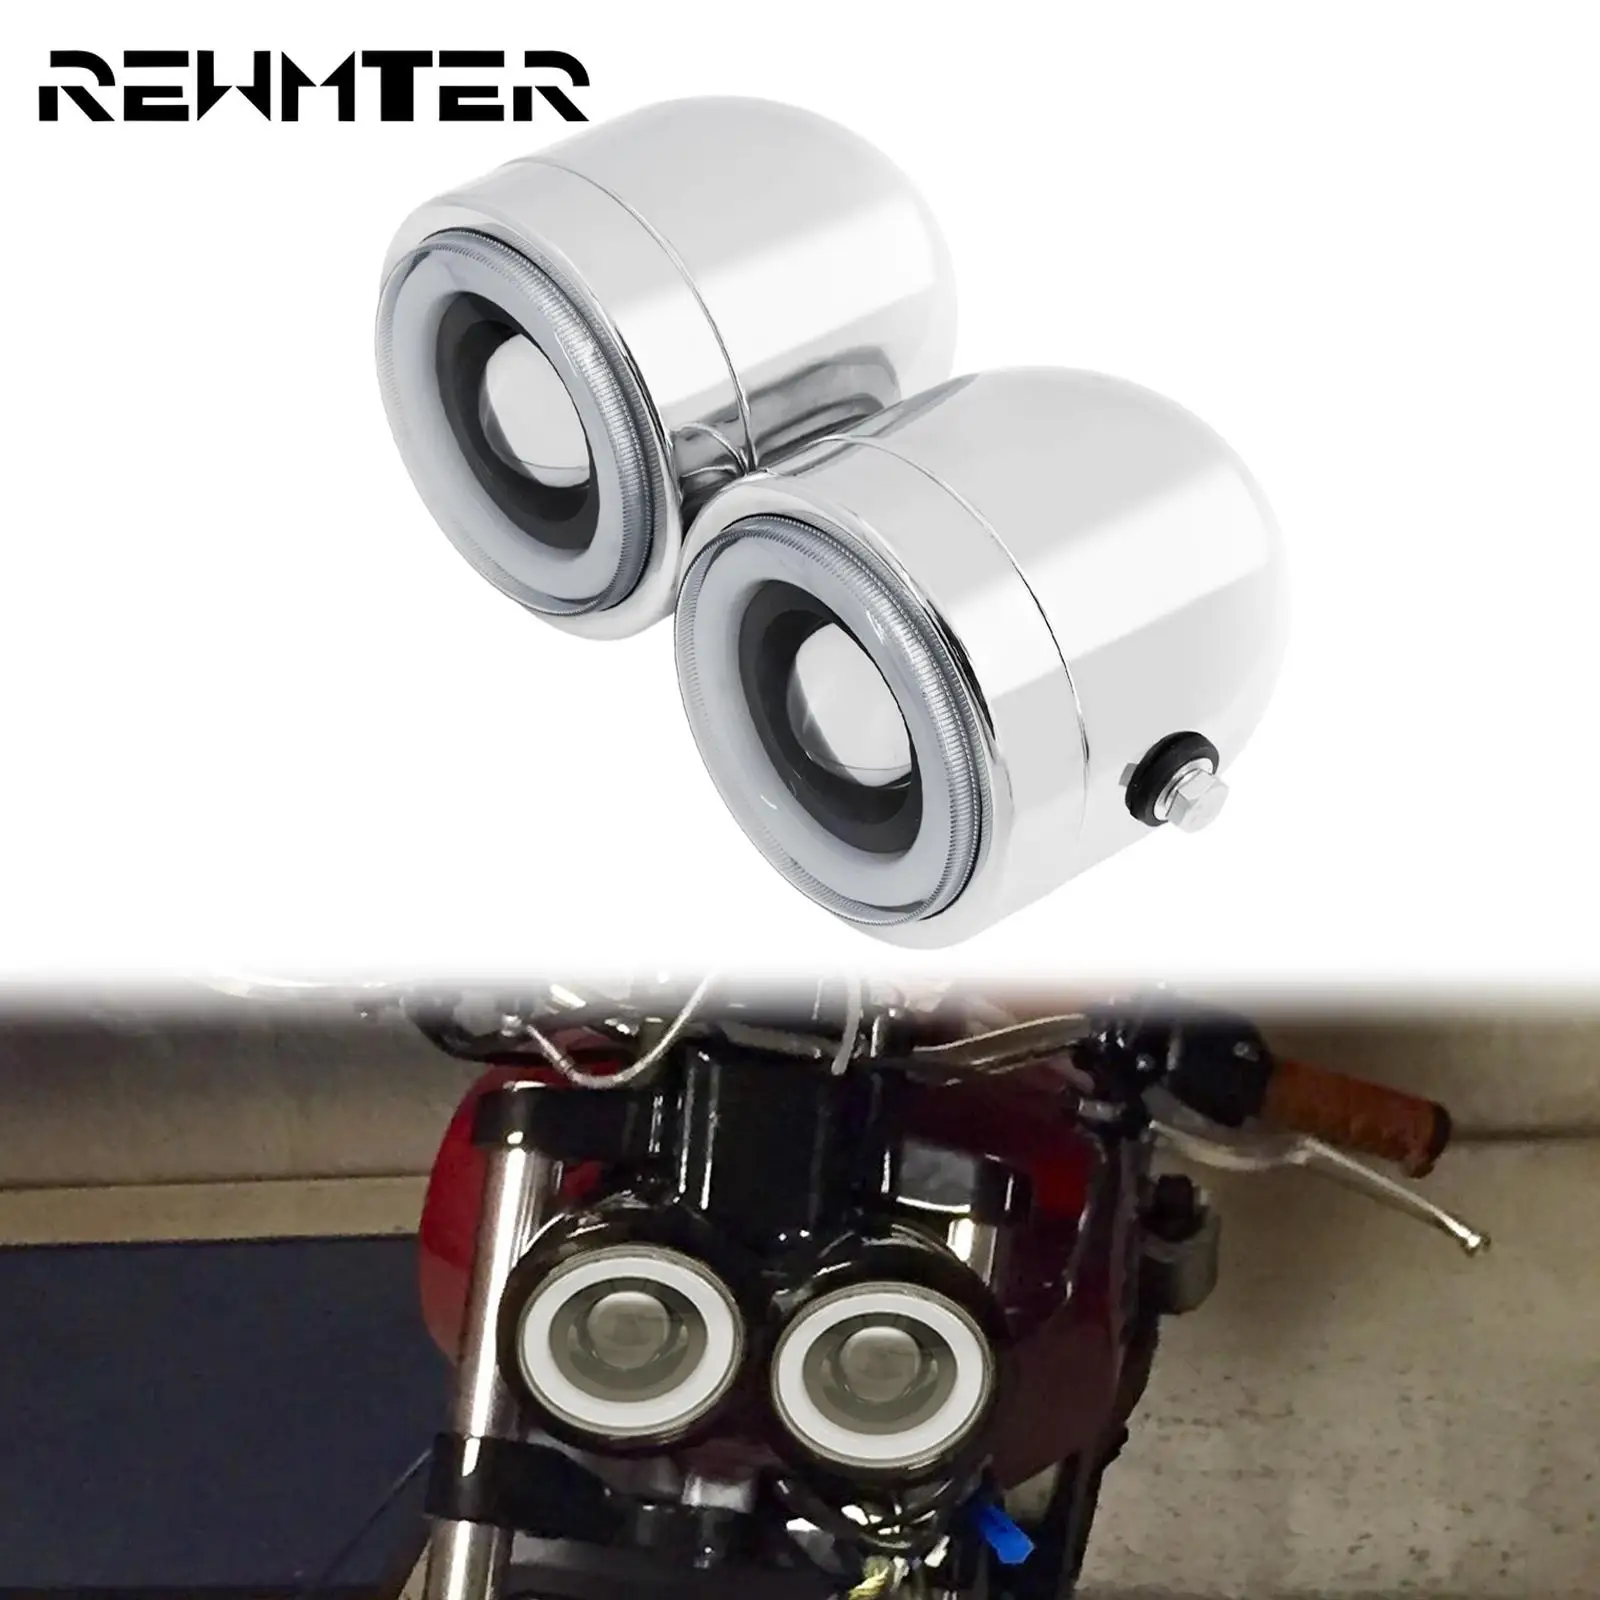 

2xMotorcycle Front Twin Dual Headlight Double Headlamp Light W/Amber Angel Eyes Lamp For Harley Chopper Bobber Custom Cafe Racer